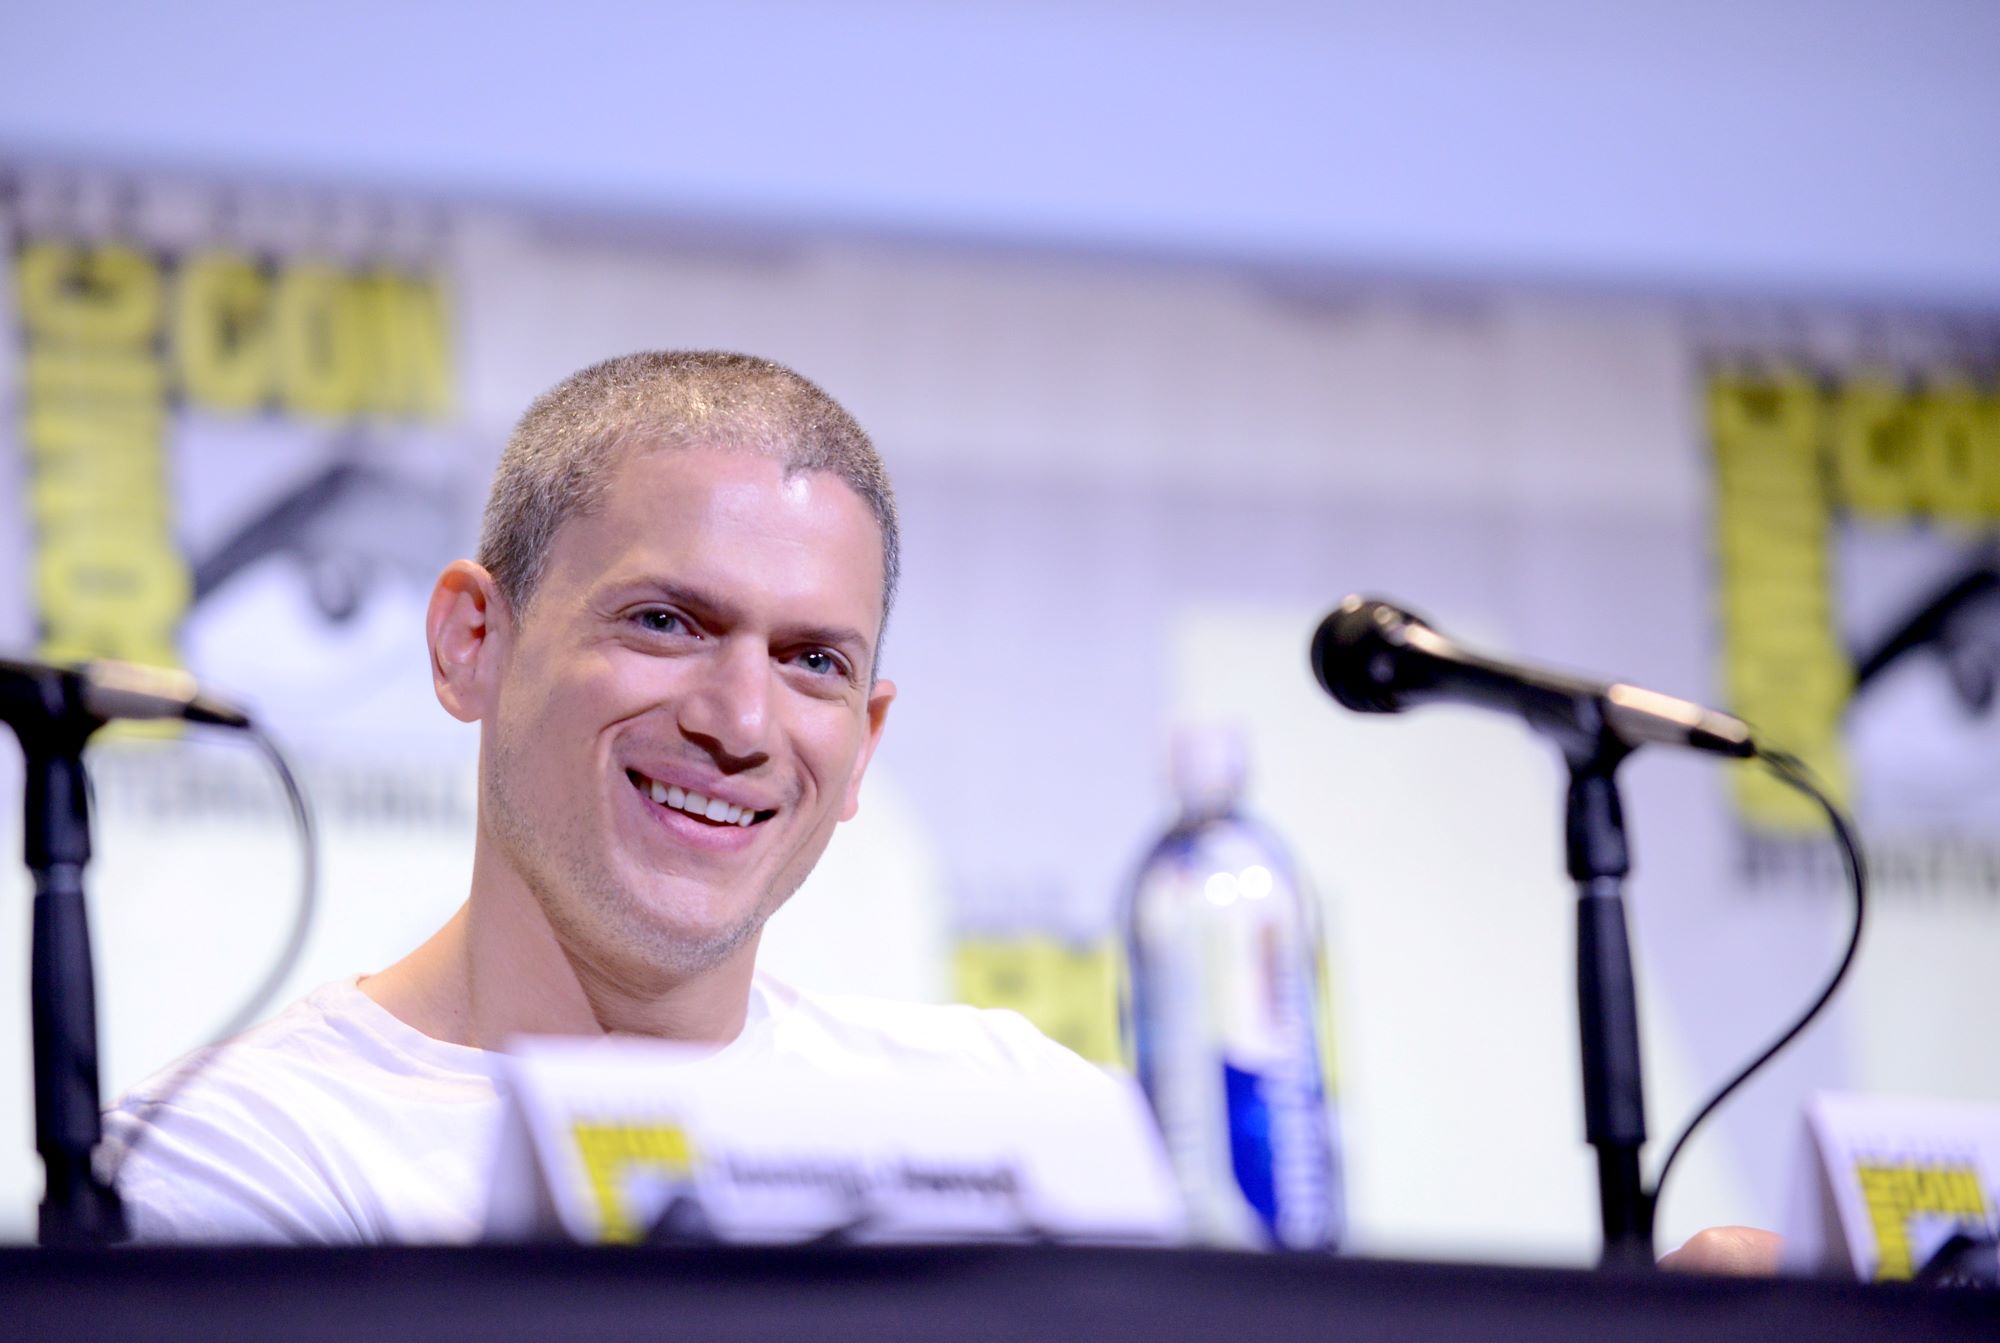 Wentworth Miller at the Fox Action Showcase event for 'Prison Break' during the 2016 San Diego Comic Con